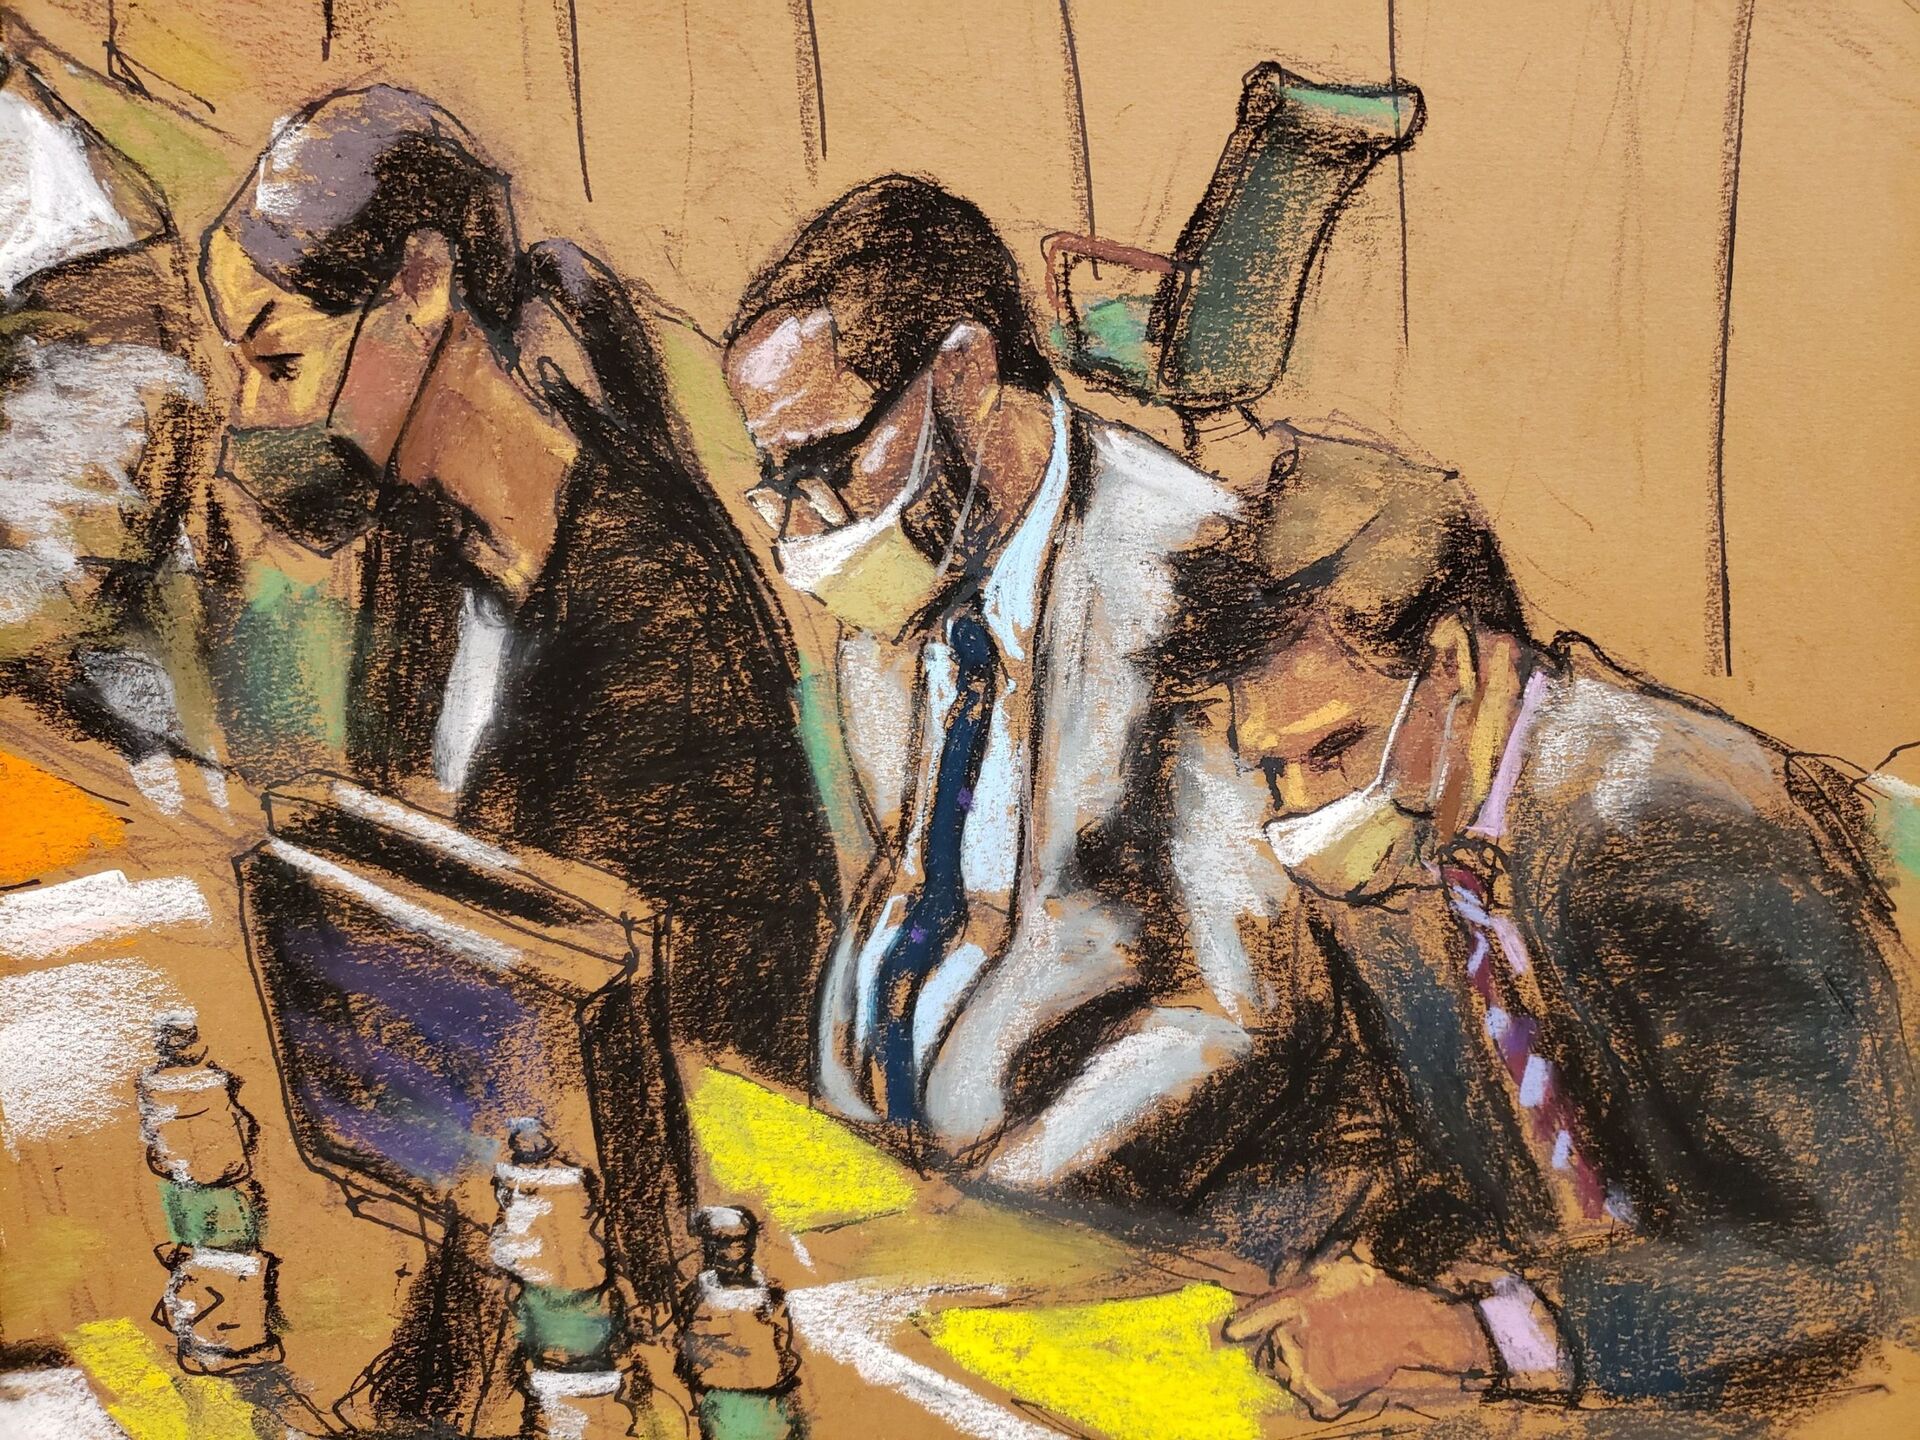 Defense lawyers Nicole Blank Becker and Thomas Farinella sit with their client R. Kelly during his sex abuse trial at Brooklyn's Federal District Court in a courtroom sketch in New York, U.S., August 31, 2021 - Sputnik International, 1920, 07.09.2021